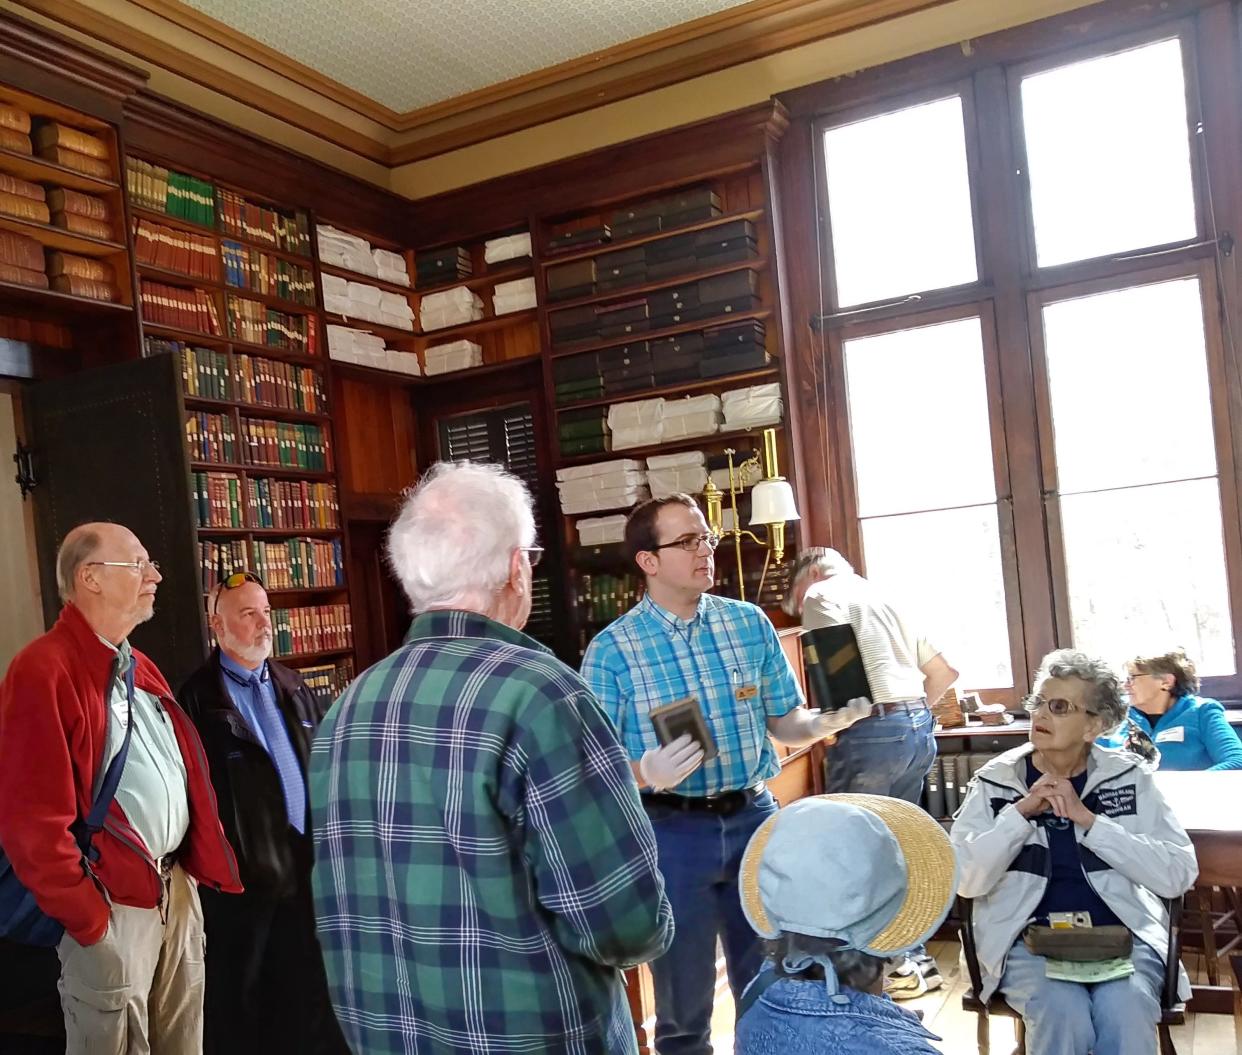 ORICL students toured the Historic Rugby library a few years ago and heard about theories presented in some of the library’s books published in the 19th century.